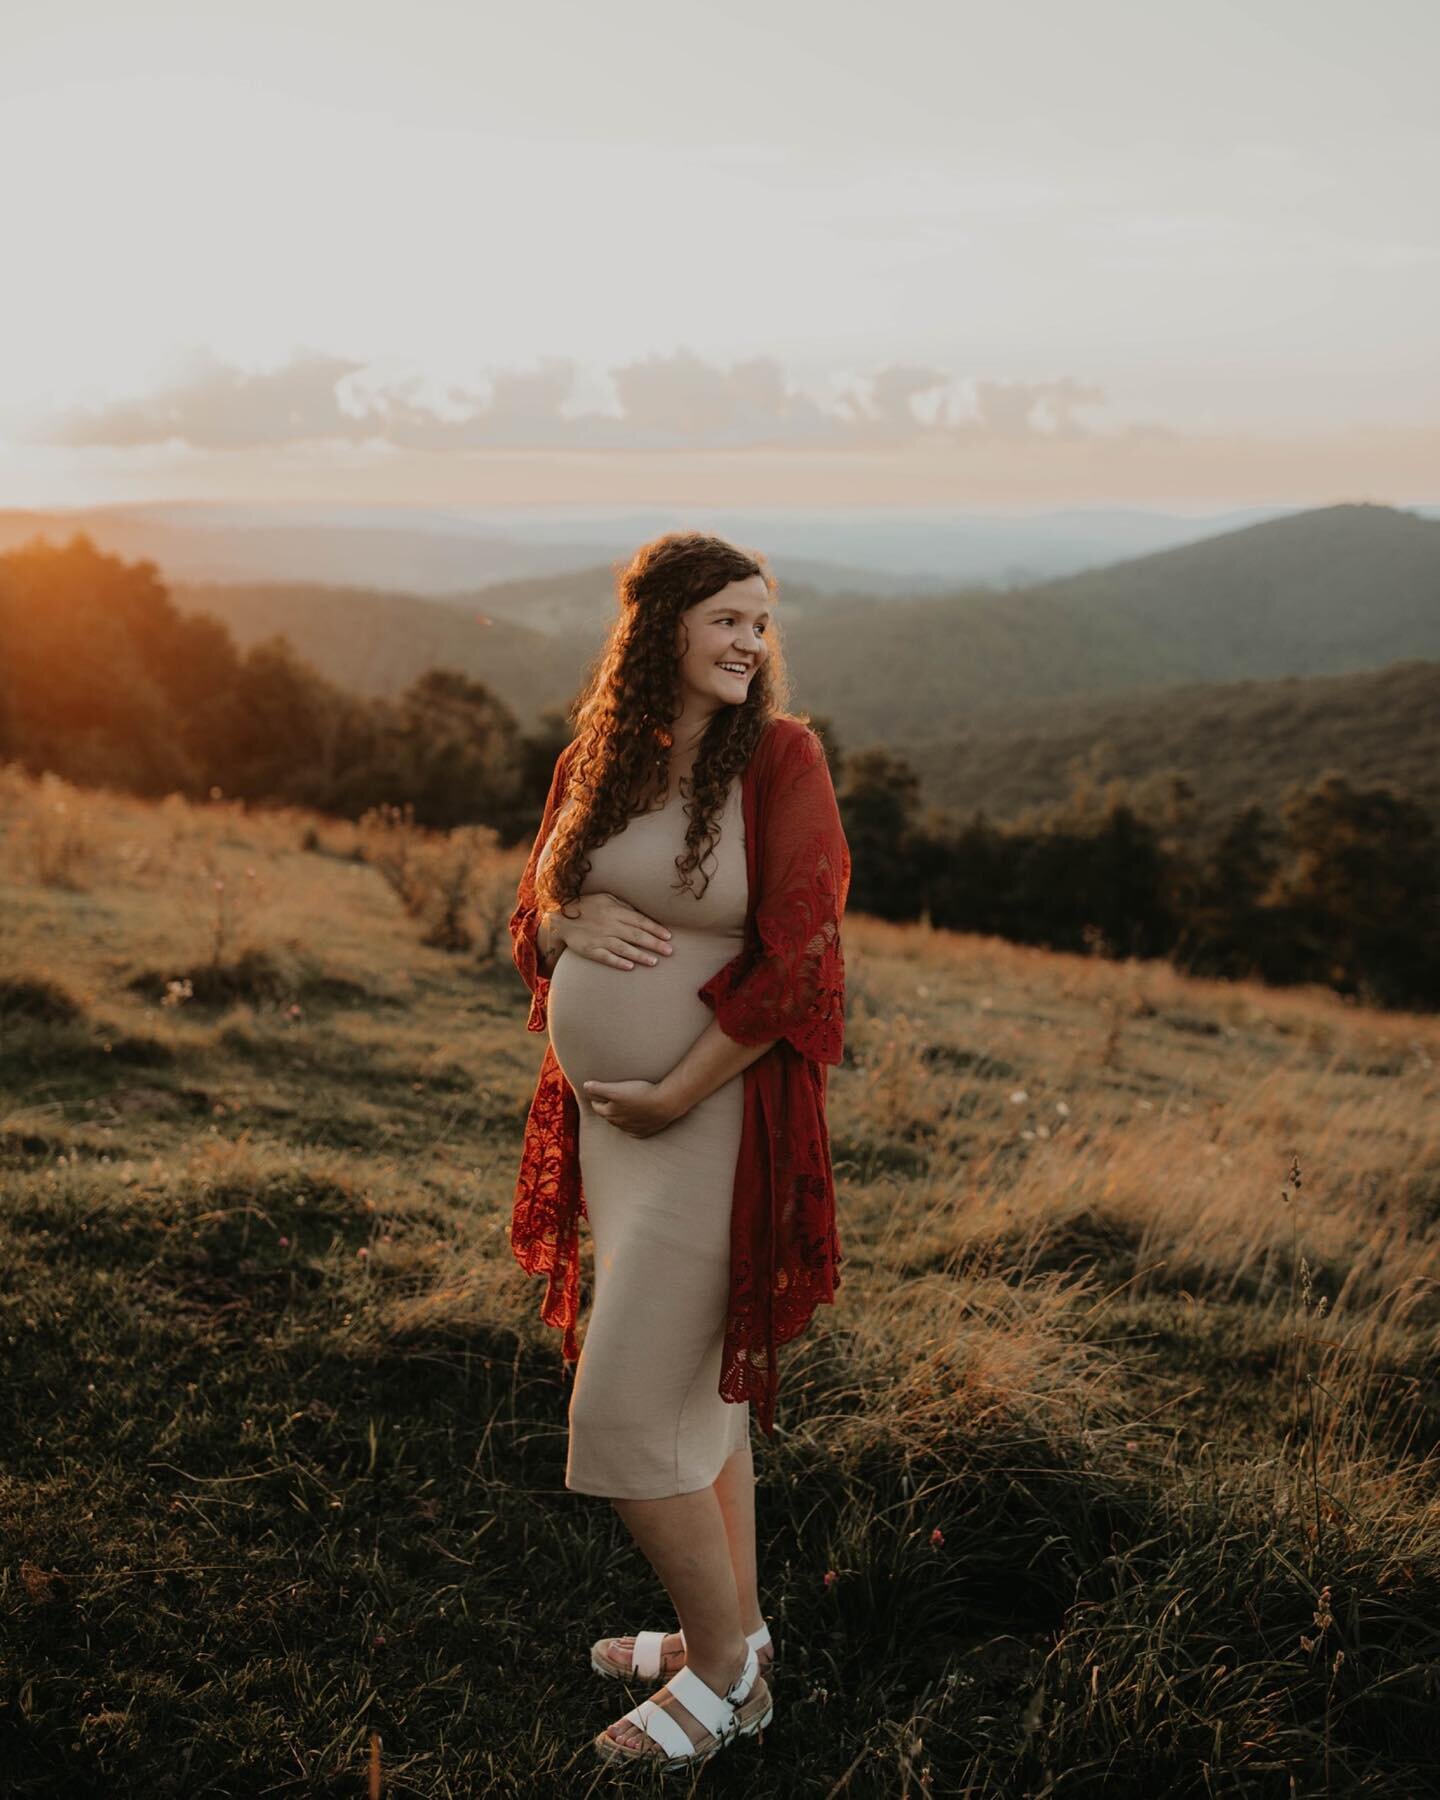 Maternity in the mountains makes my heart swelllllll every dang time. 🥹😭 

This was the perfect session to end a crazy week before my little fam heads out of town for our first real vacation since having our girl and I. can&rsquo;t. waittttt. 🙌🏼